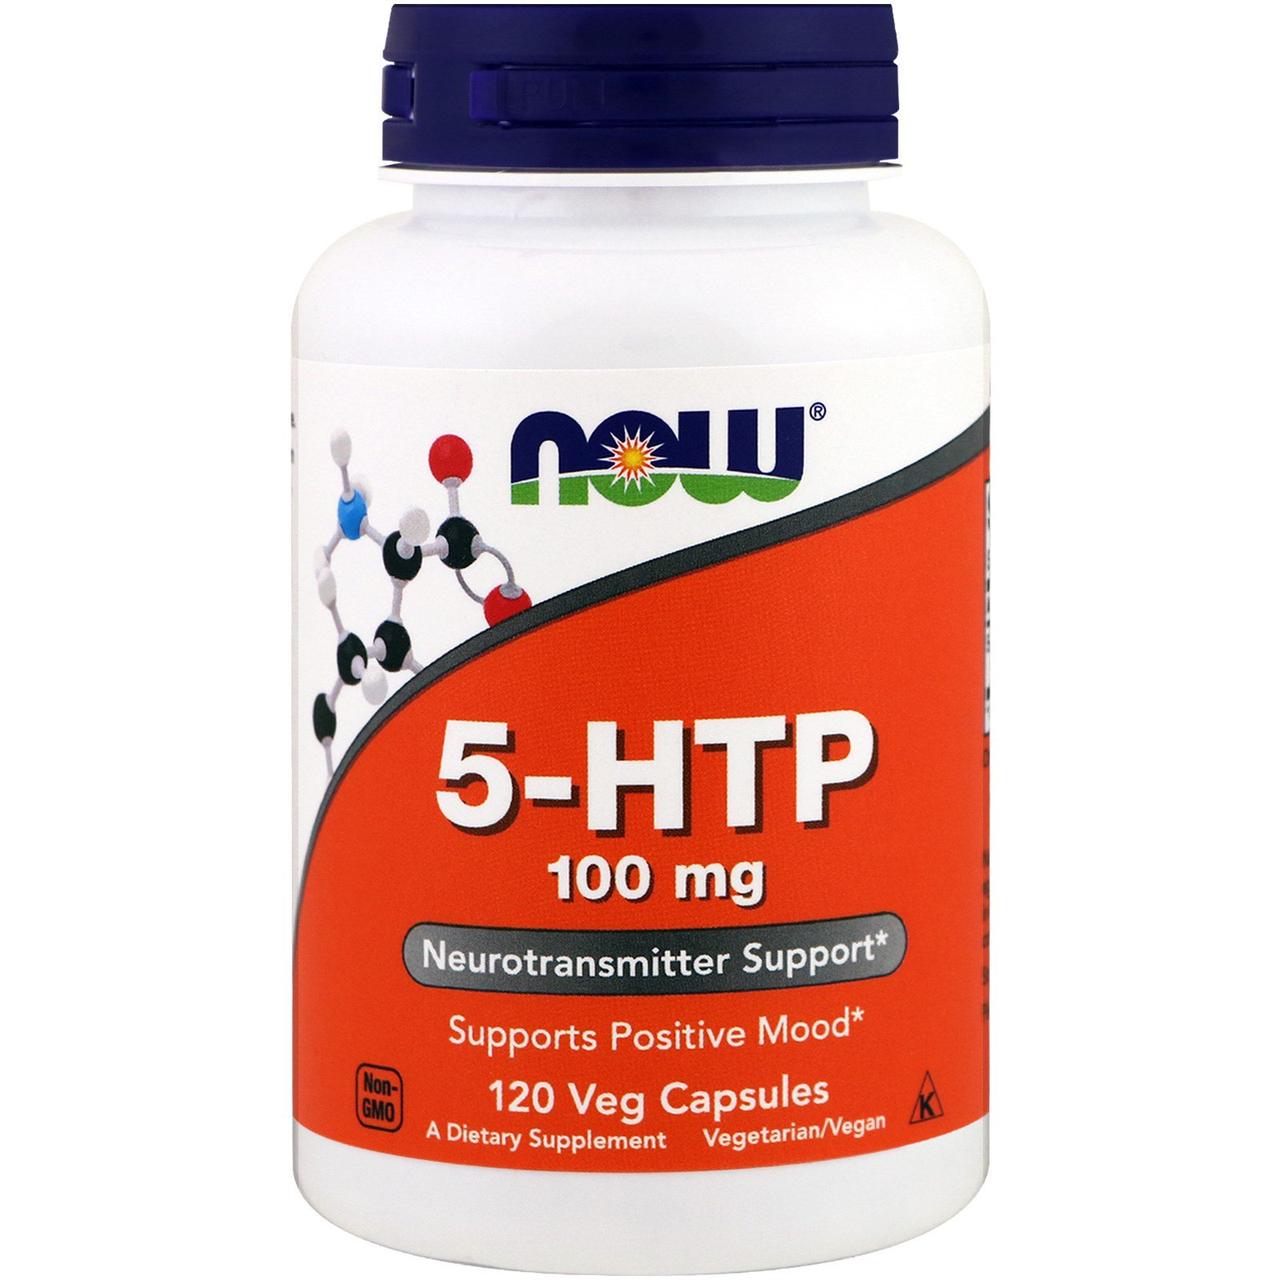 5-HTP, Now Foods, 100 мг, 120 капсул